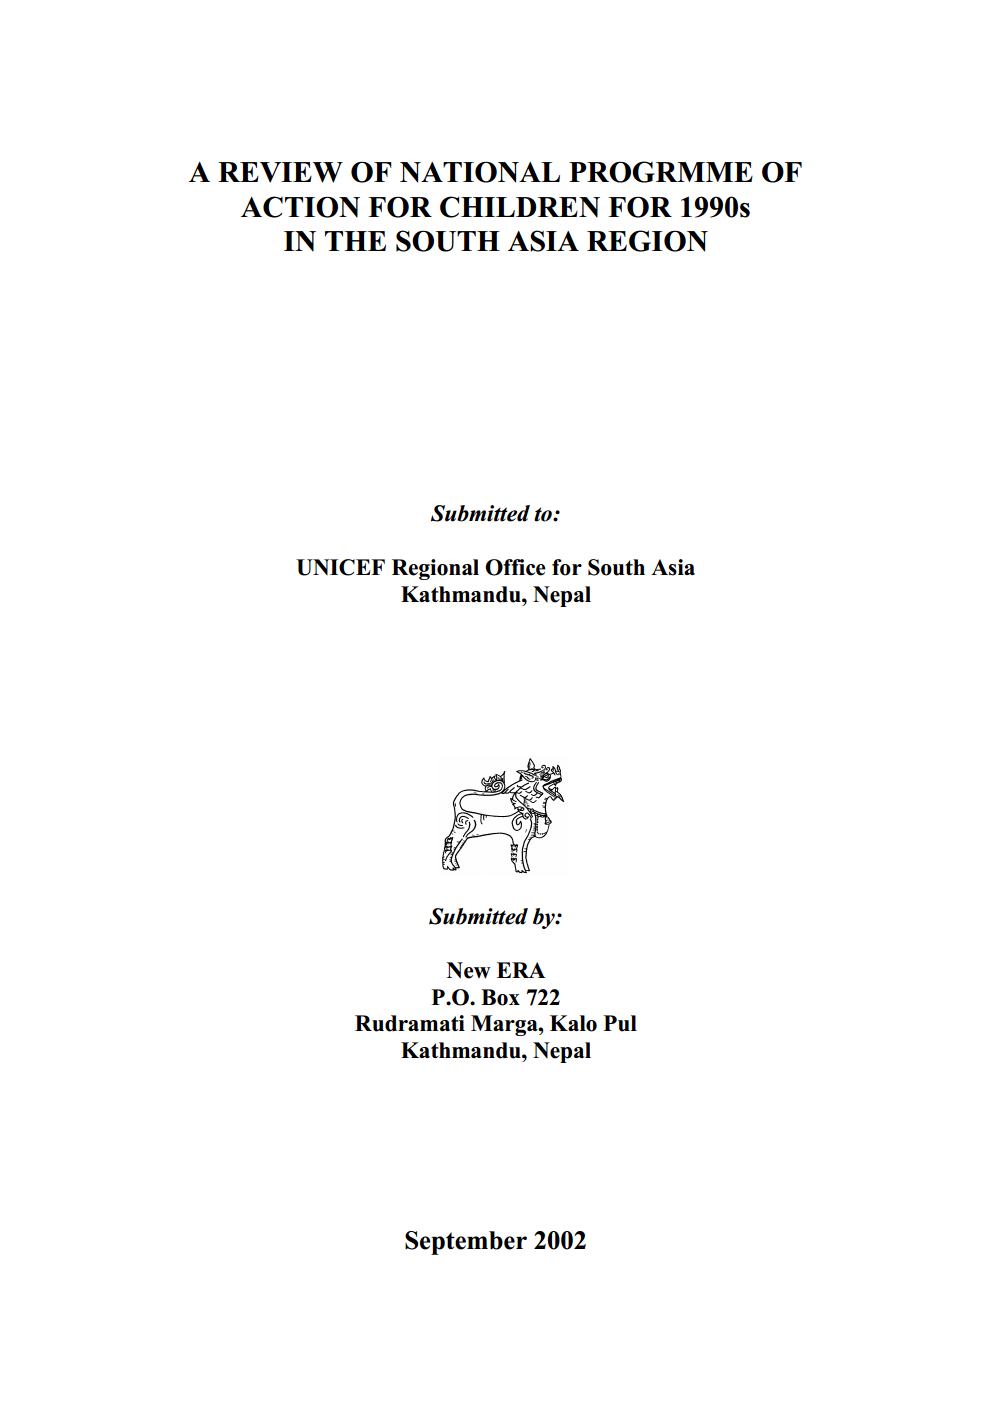 A Review of National Program of Action for Children for 1990s in the South Asia Region